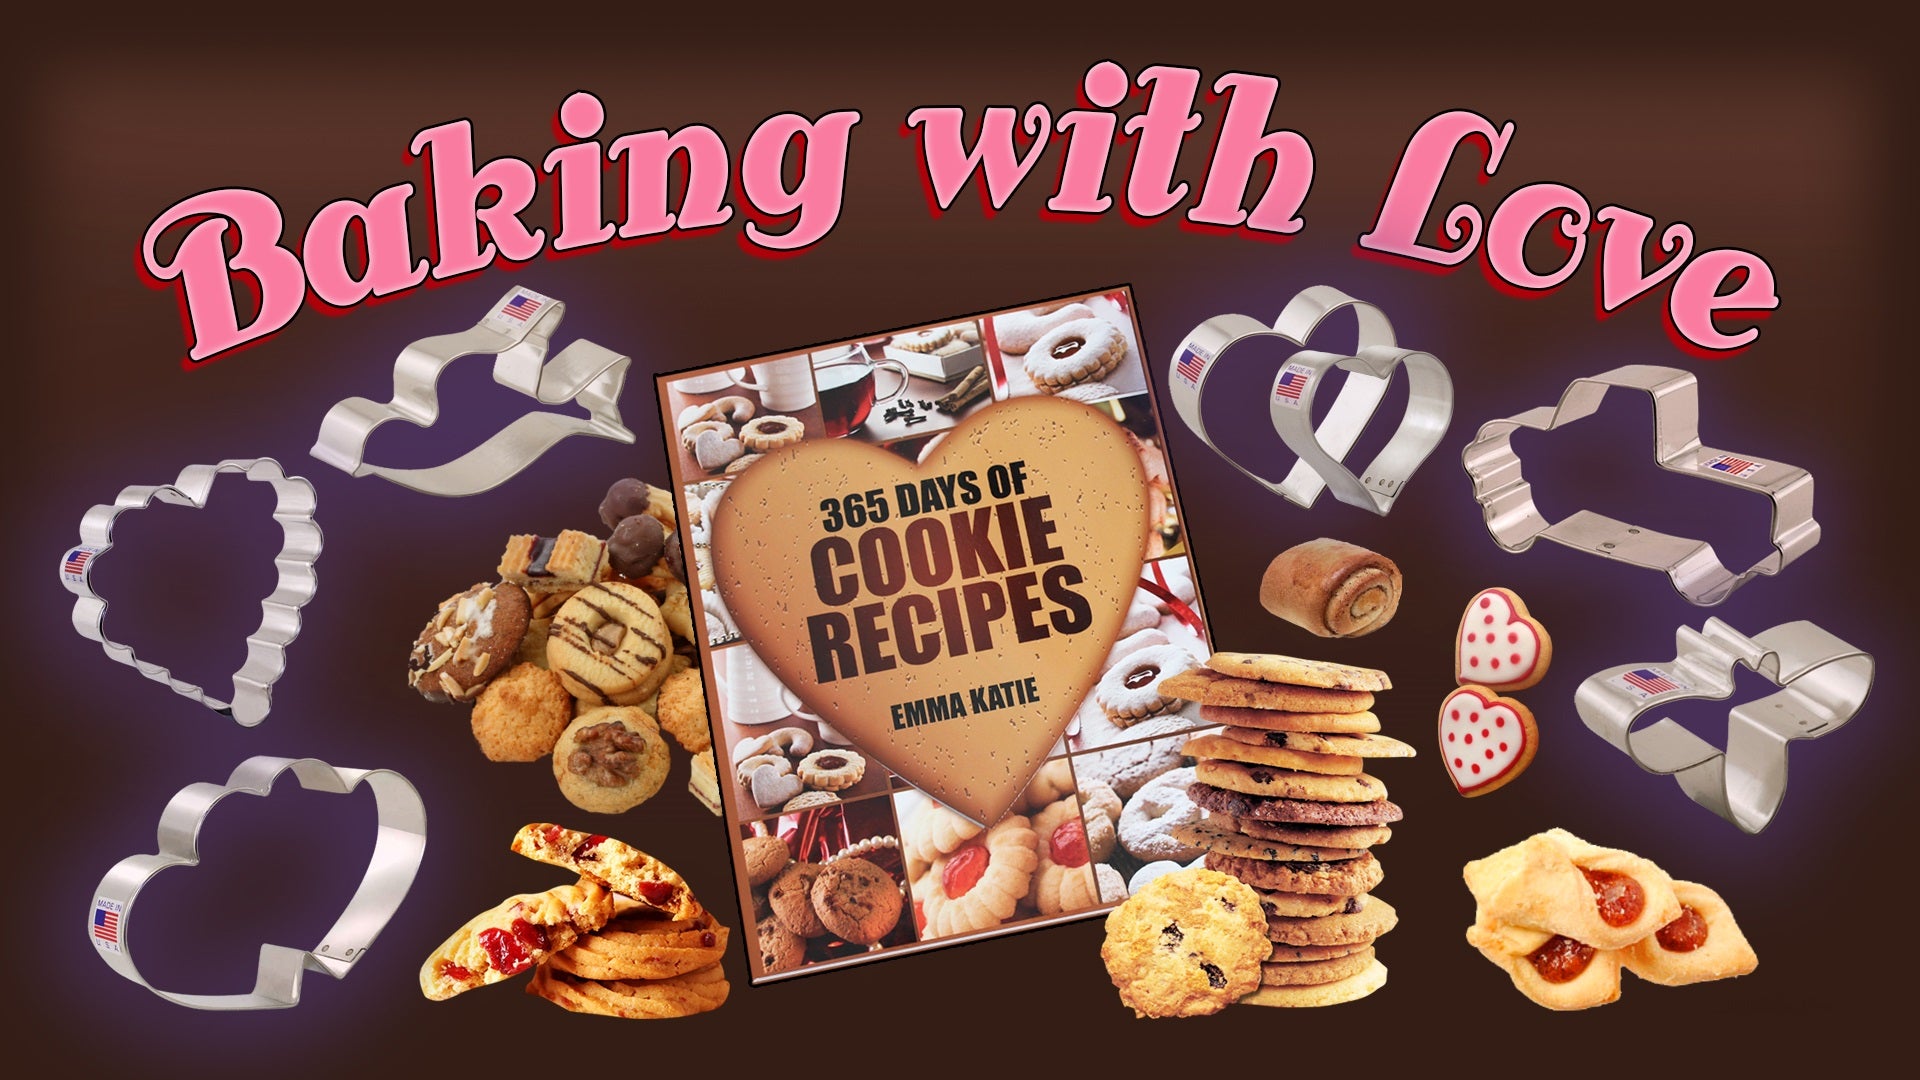 Baking With Love Cookie Contest